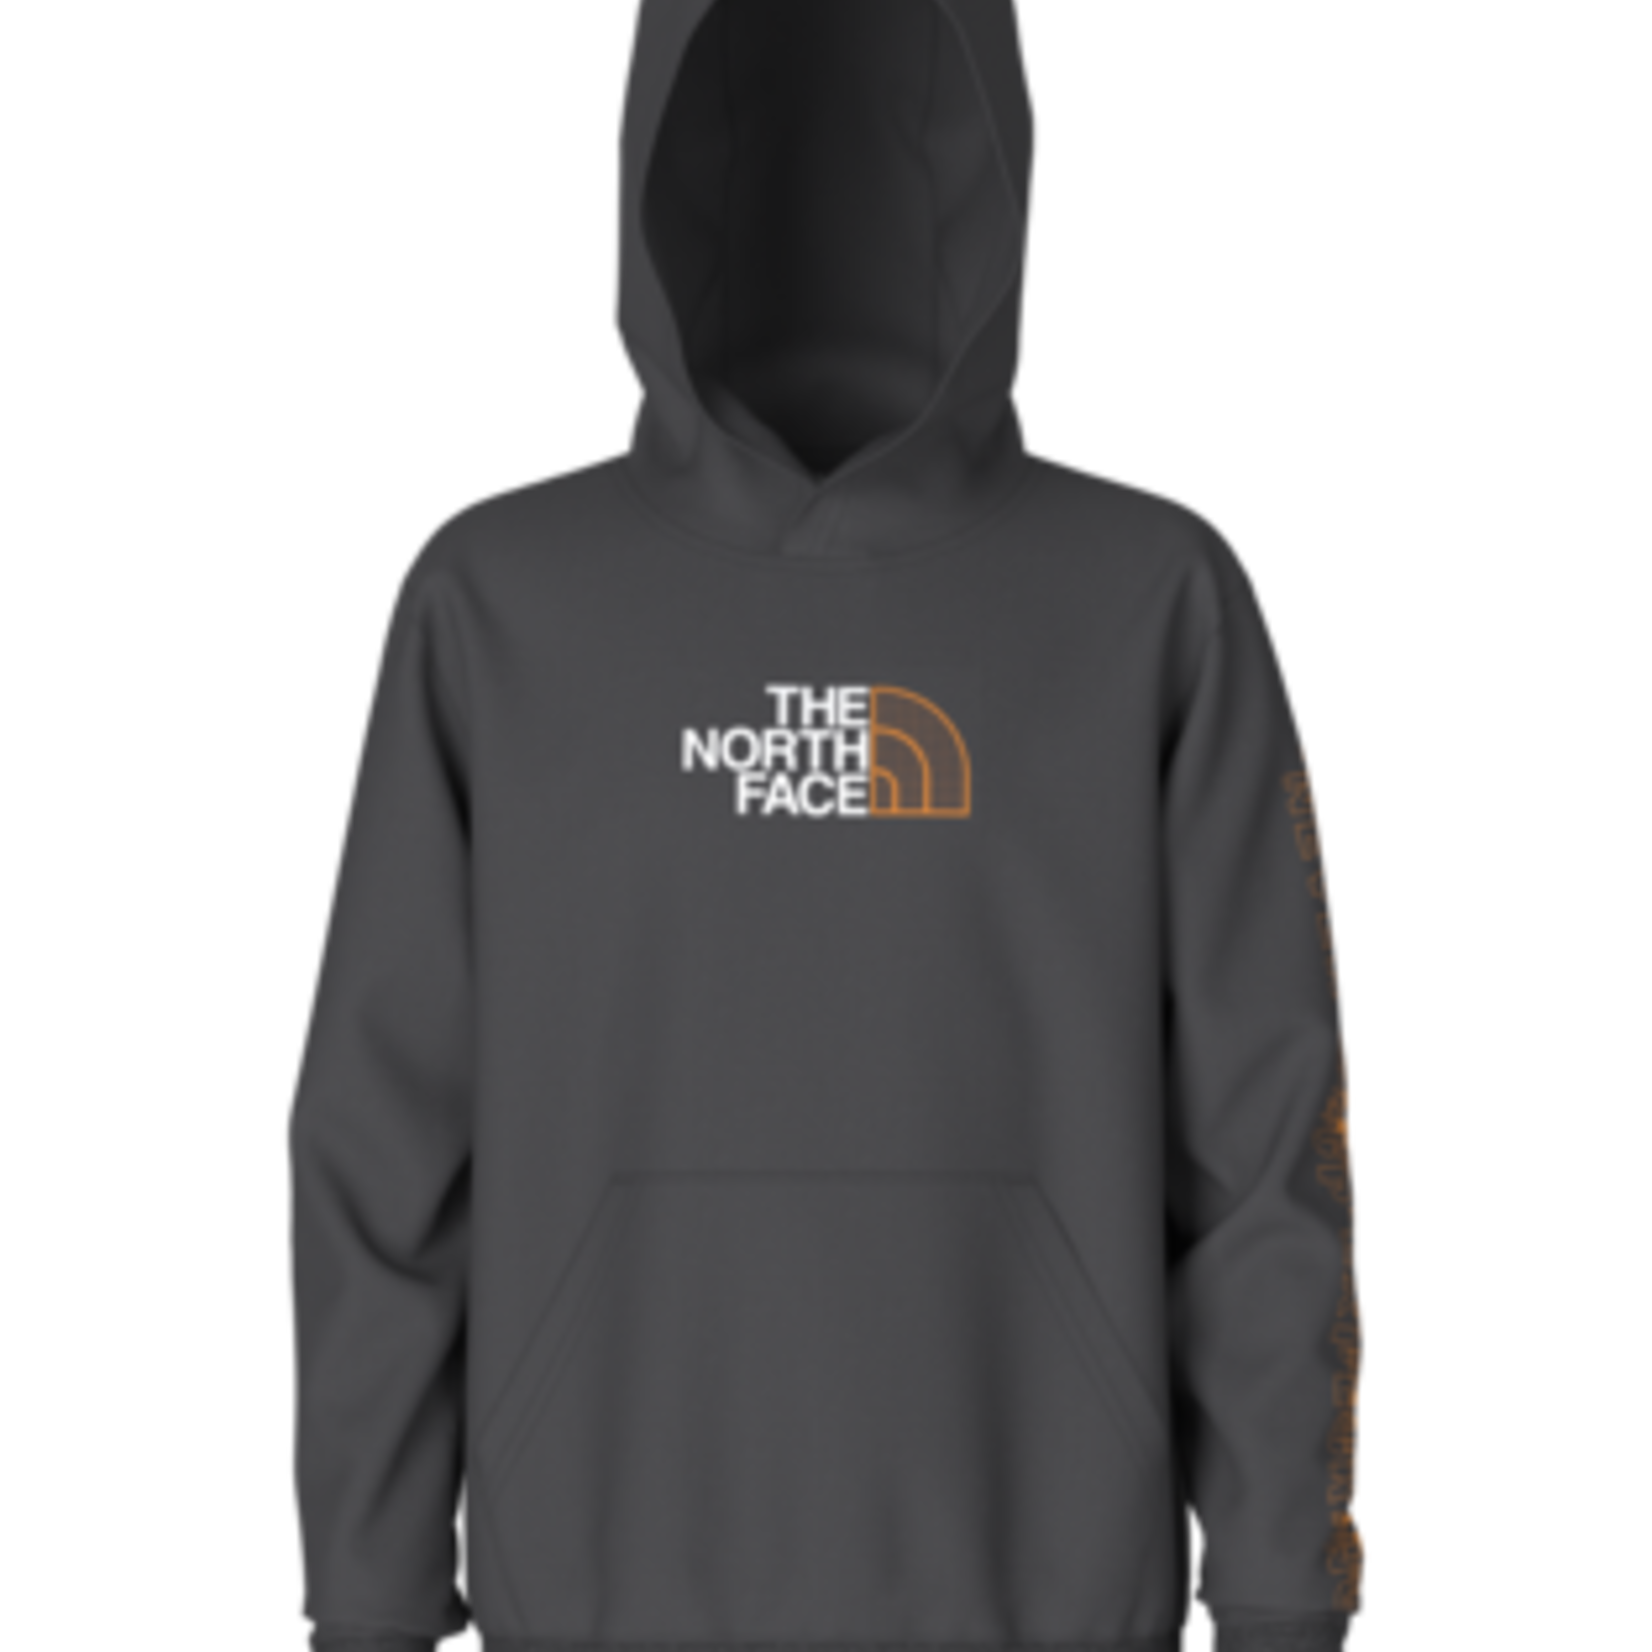 The North Face The North Face Hoodie, Camp Fleece Pullover, Boys